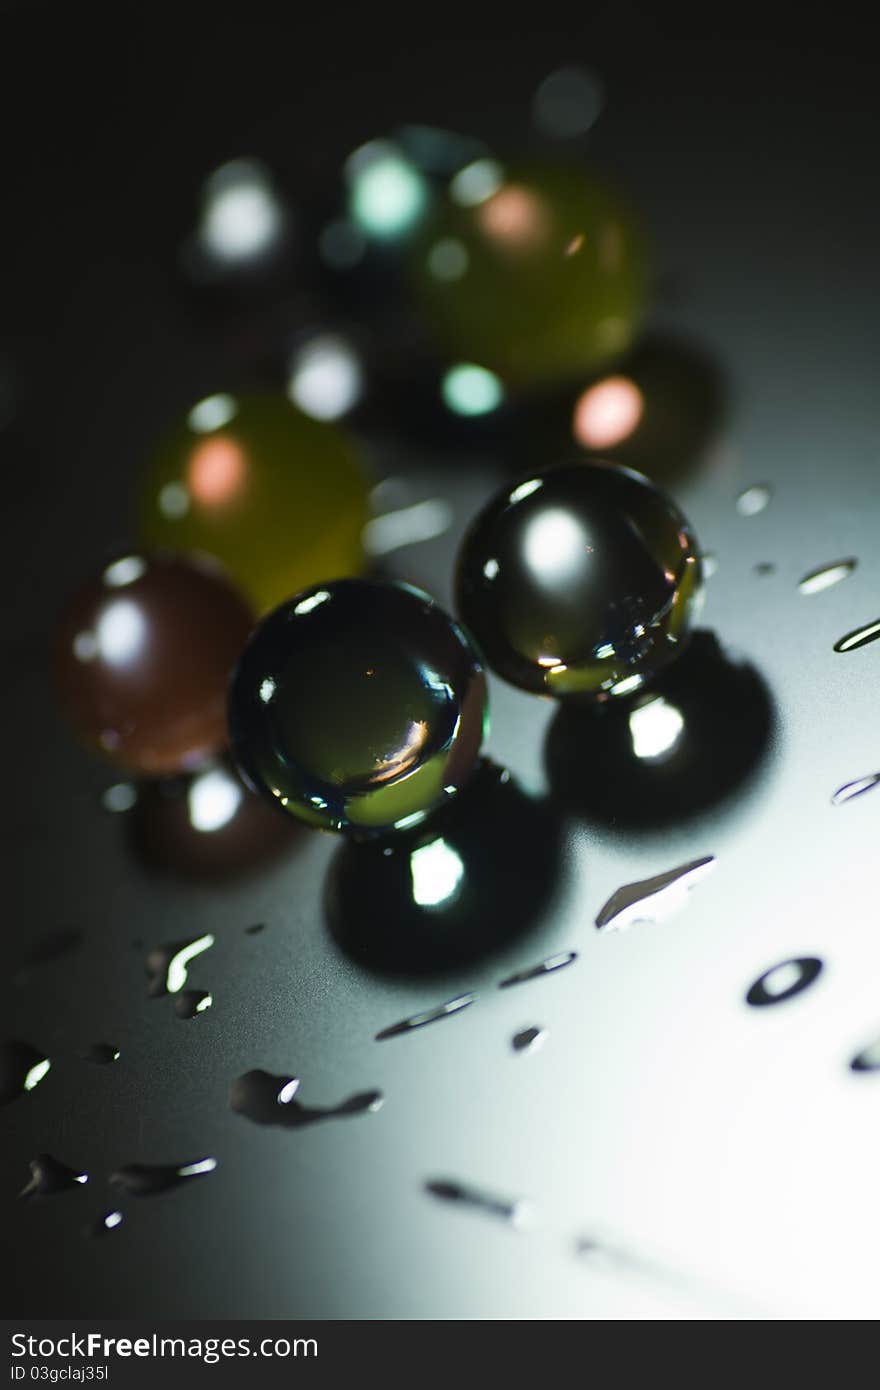 Abstract background with glass balls, water and light effects. Abstract background with glass balls, water and light effects